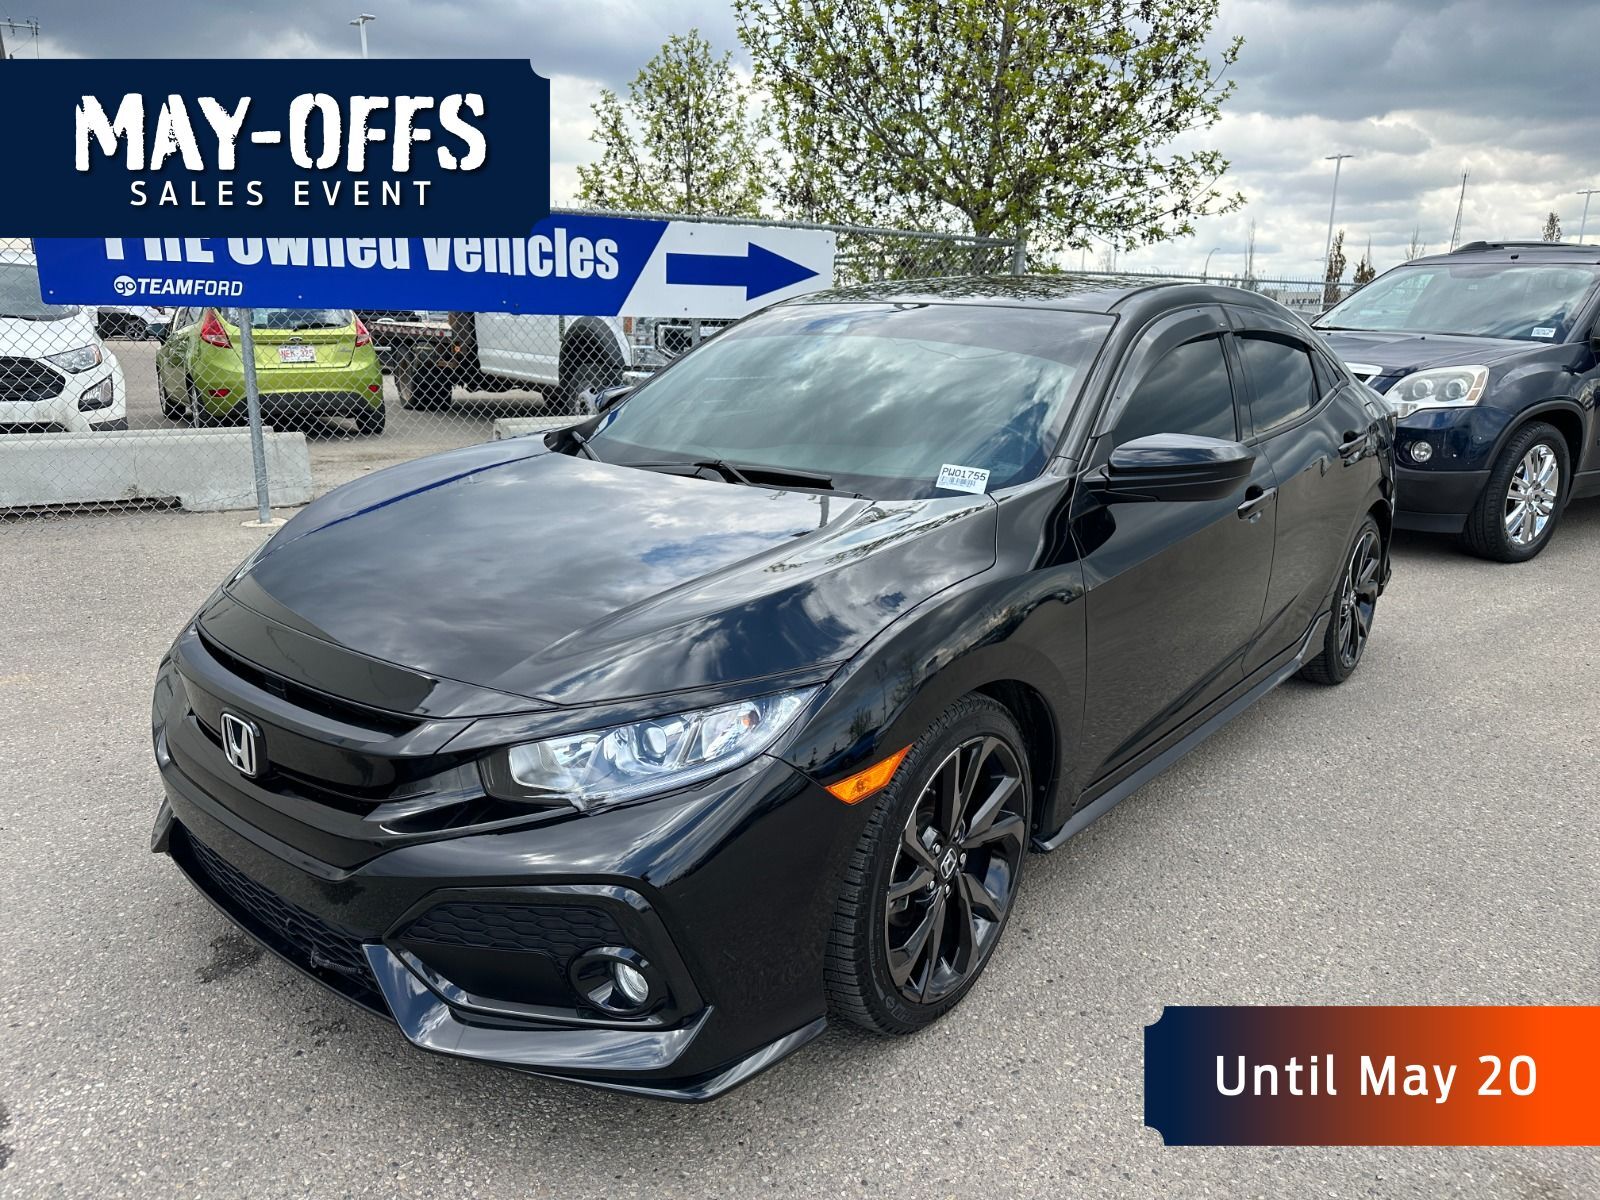 2019 Honda Civic Hatchback SPORT- LEATHER, HEATED SEATS, BLUETOOTH MUCH MORE!